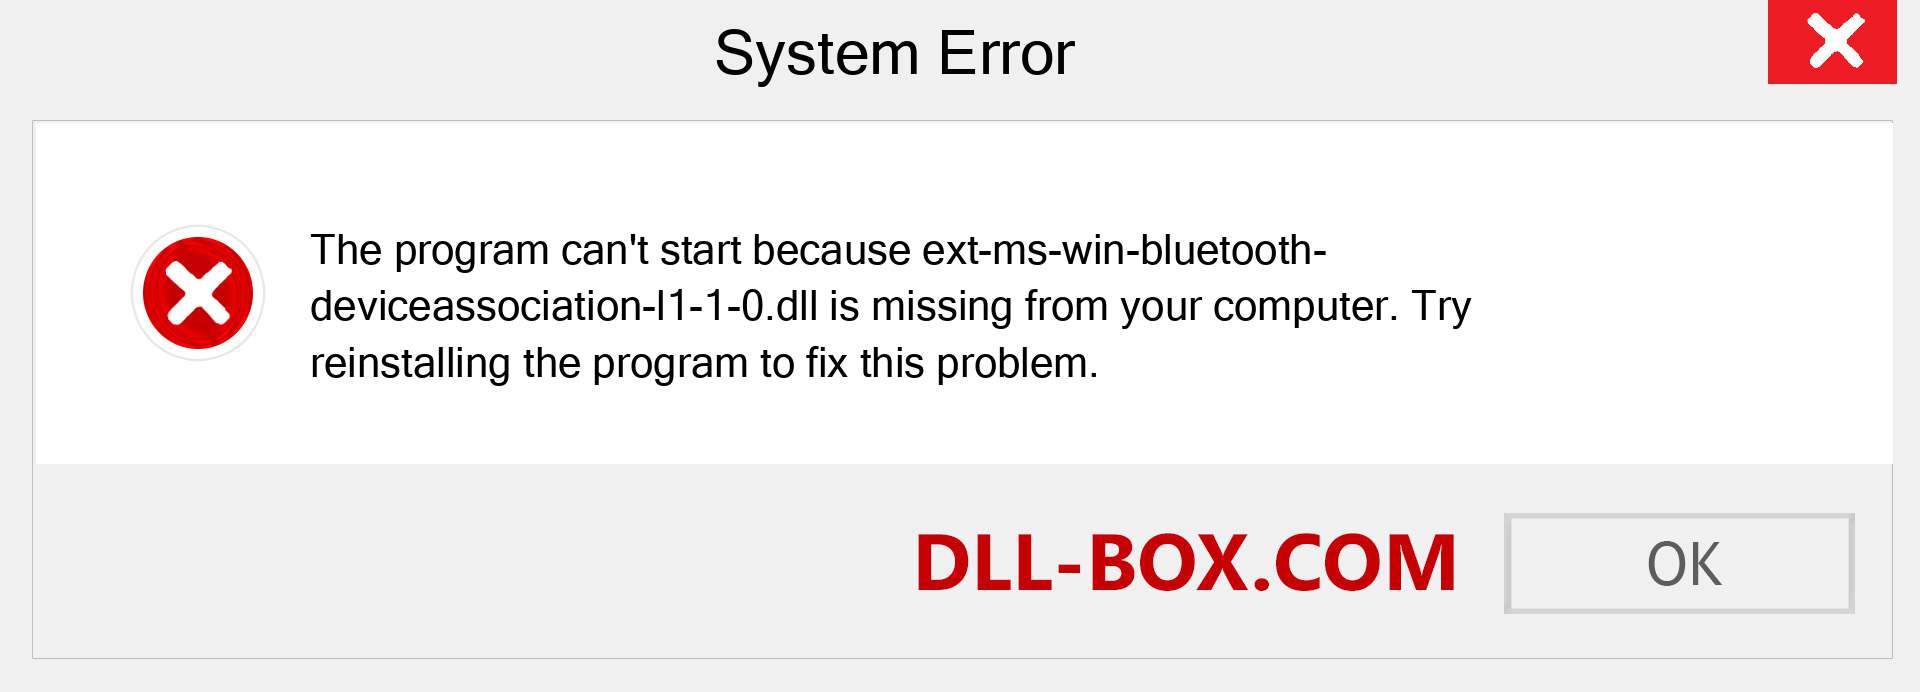  ext-ms-win-bluetooth-deviceassociation-l1-1-0.dll file is missing?. Download for Windows 7, 8, 10 - Fix  ext-ms-win-bluetooth-deviceassociation-l1-1-0 dll Missing Error on Windows, photos, images